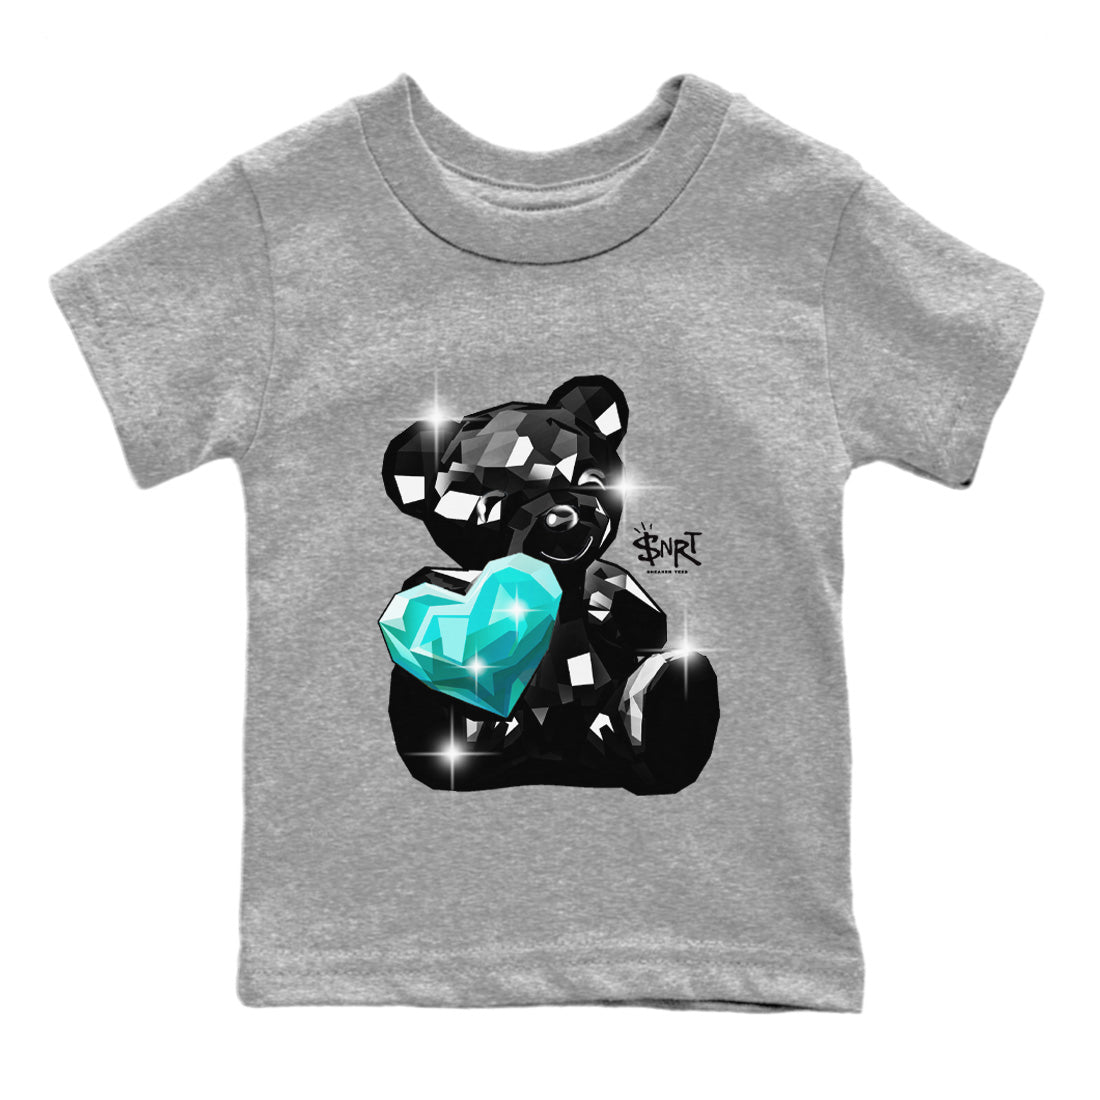 Air Force 1 Tiffany Bear Germs Baby and Kids Sneaker Tees Air Force 1 Low x Tiffany Kids Sneaker Tees Washing and Care Tip